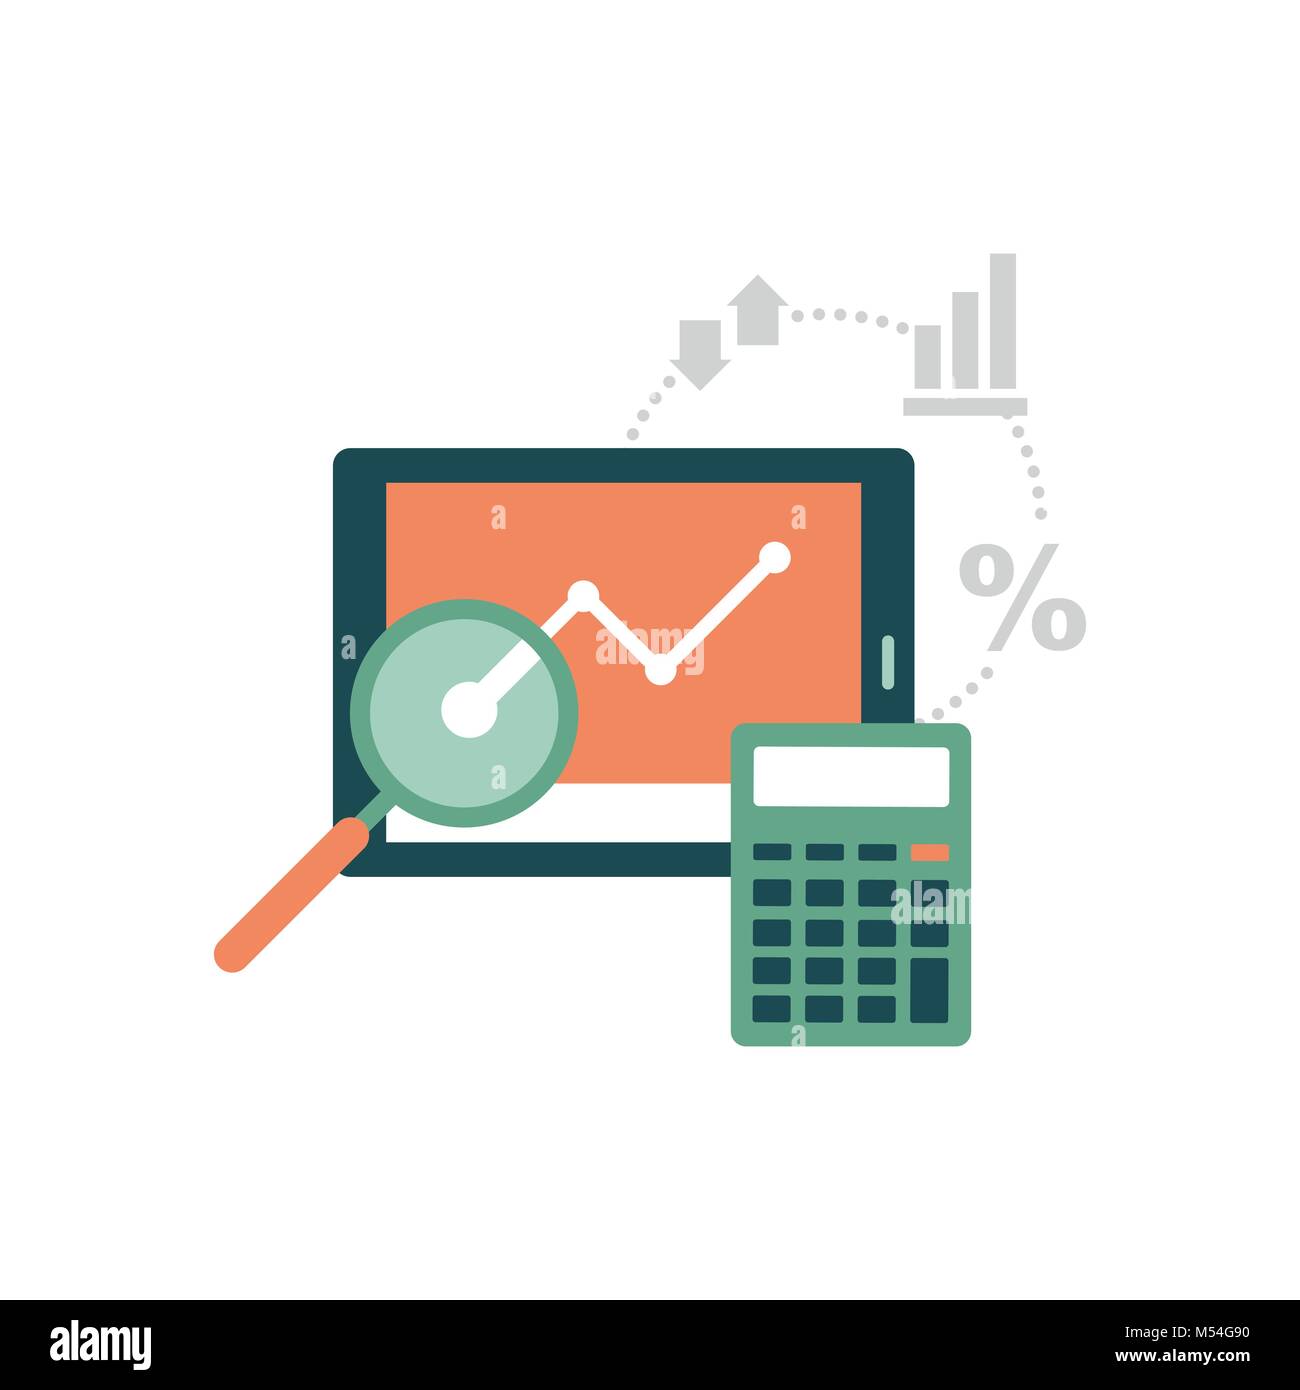 Business app with successful financial chart, calculator and magnifier Stock Vector